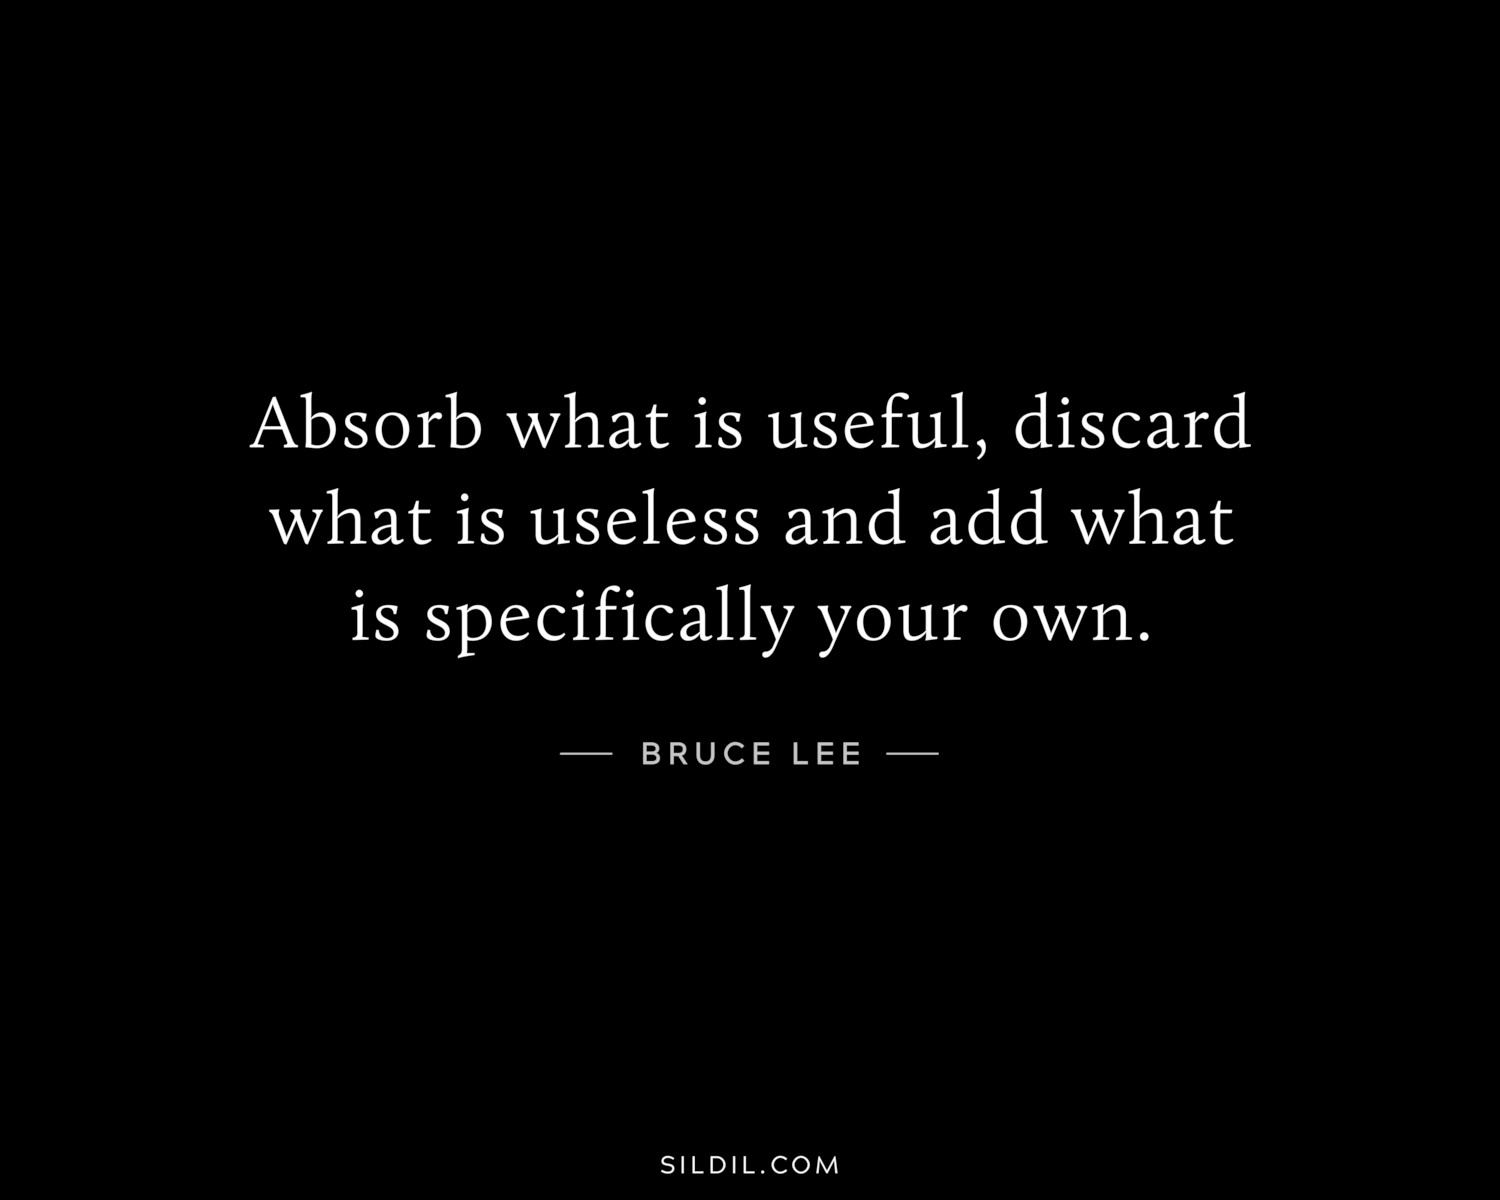 Absorb what is useful, discard what is useless and add what is specifically your own.